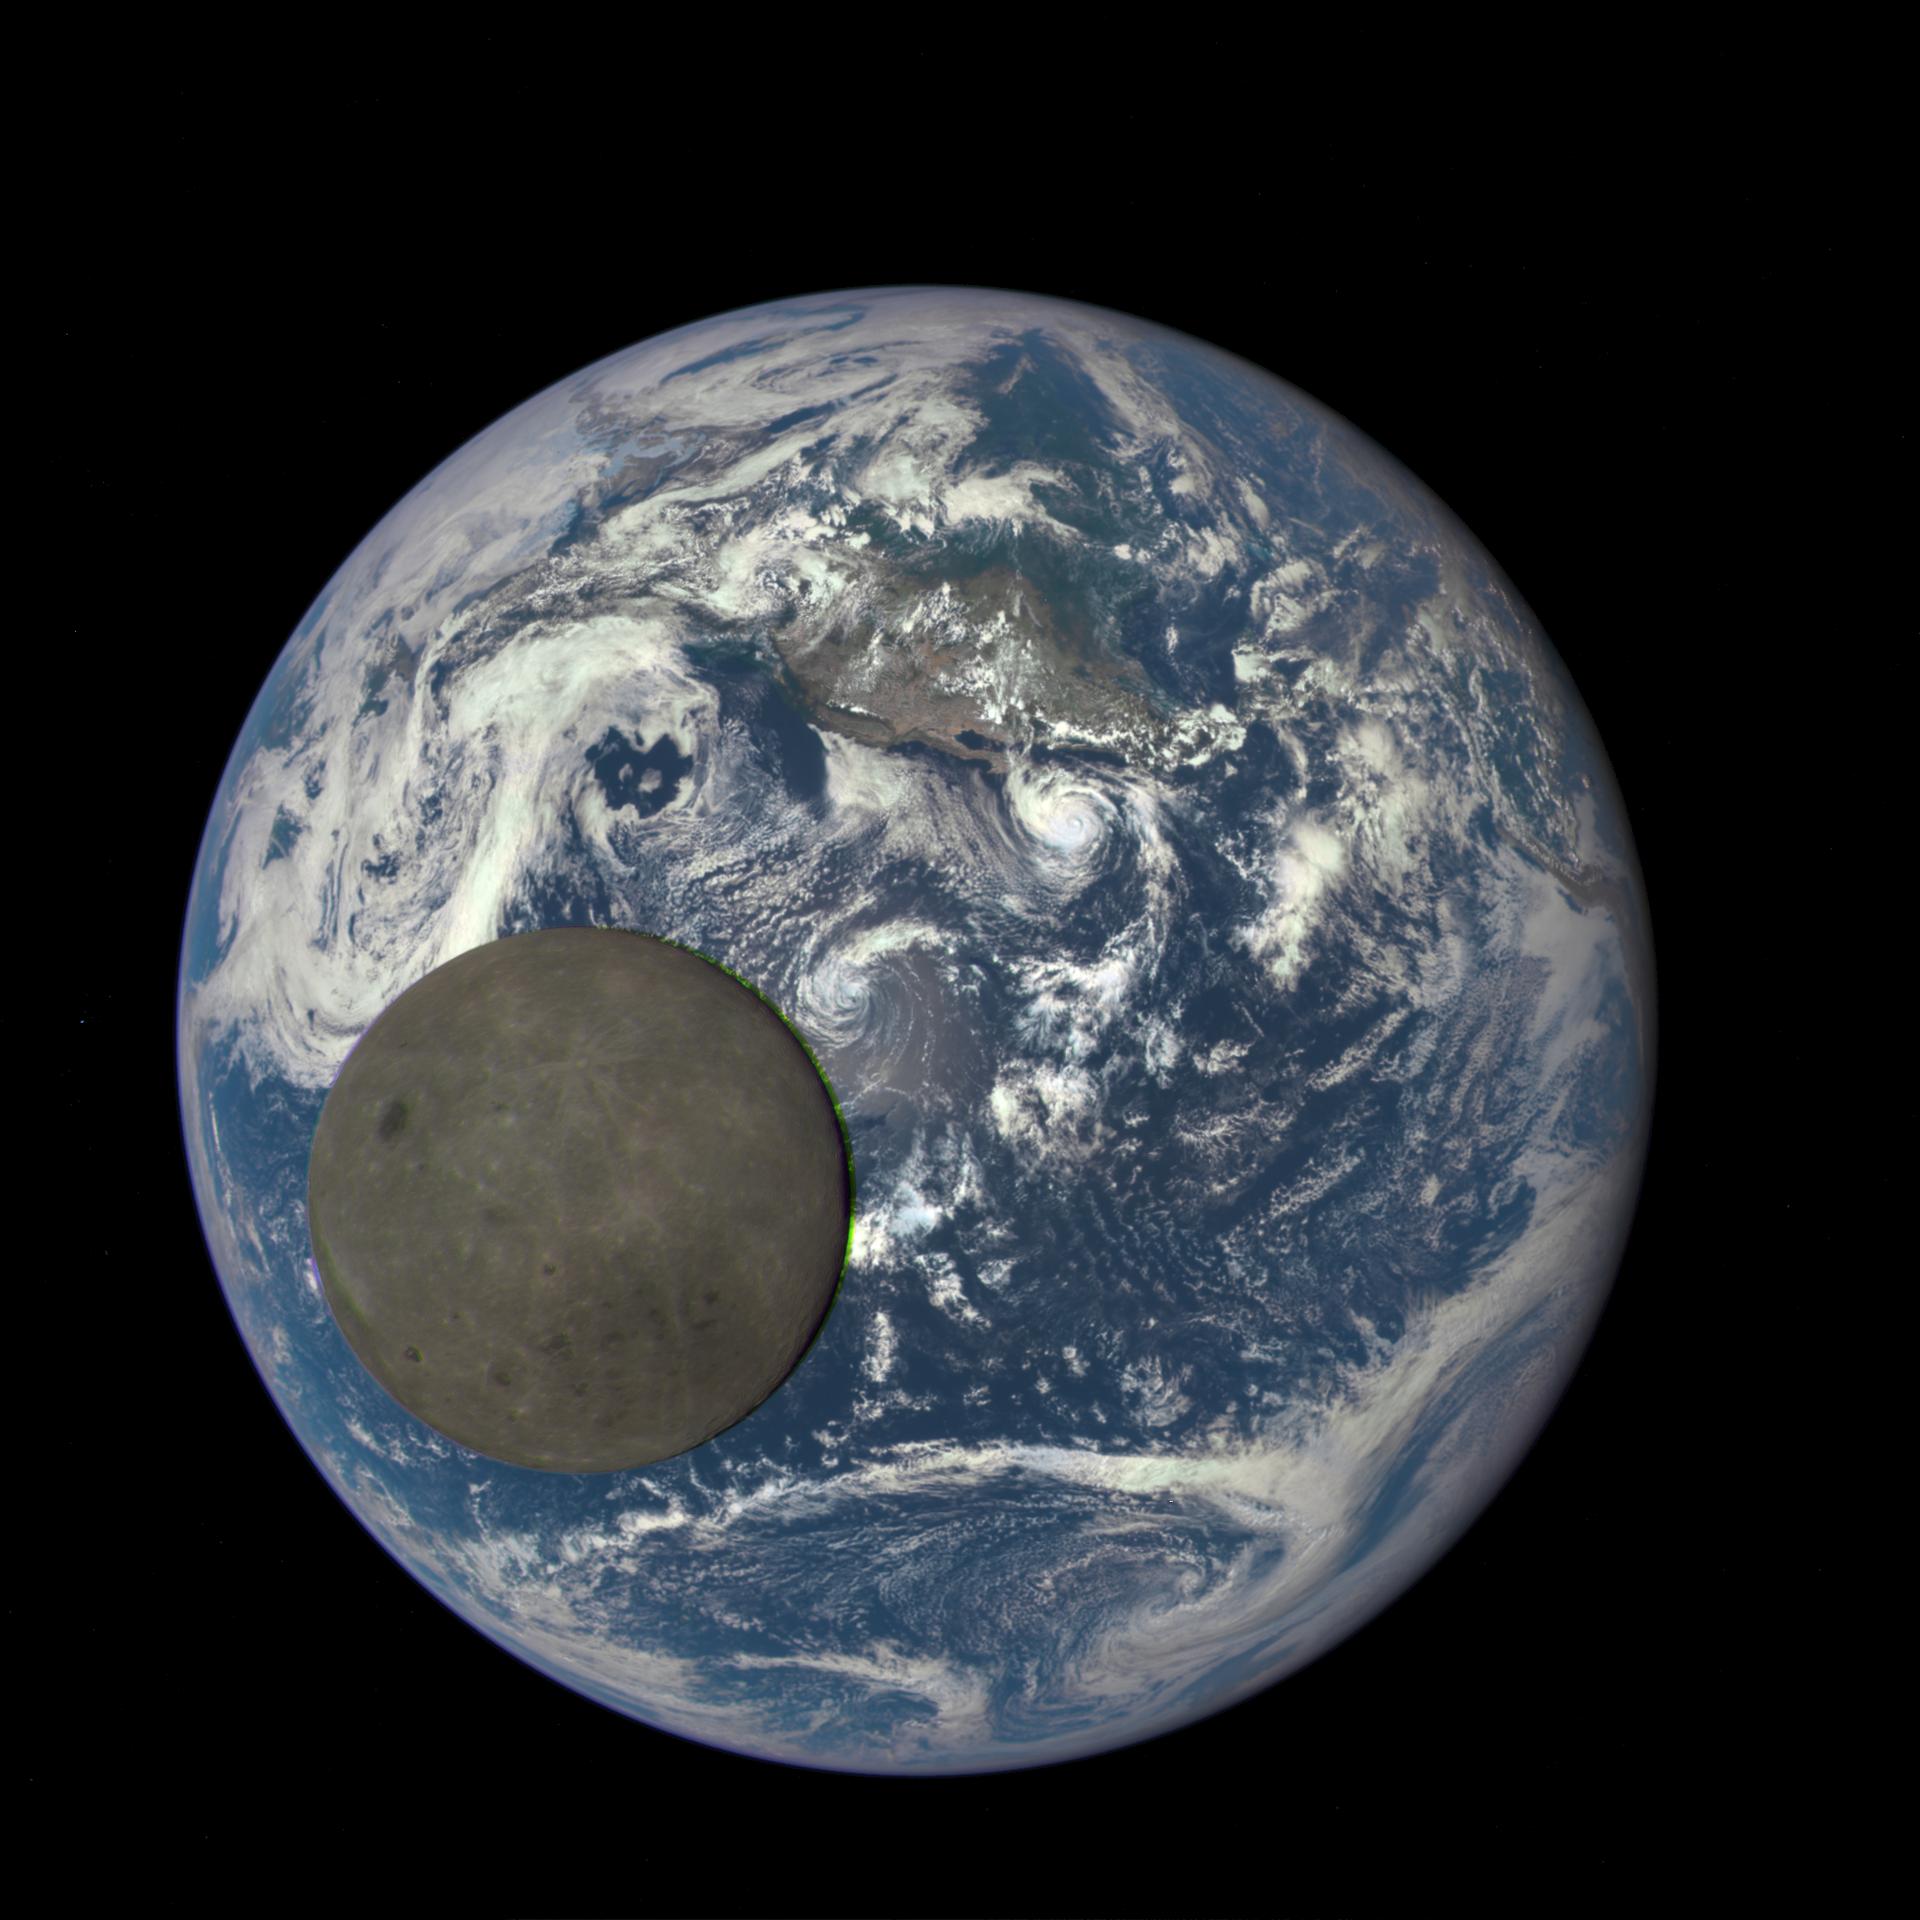 Dark grey Moon passing in front of Earth. The Moon's diameter appears to be about 1/3 of Earth's from this point of view. 